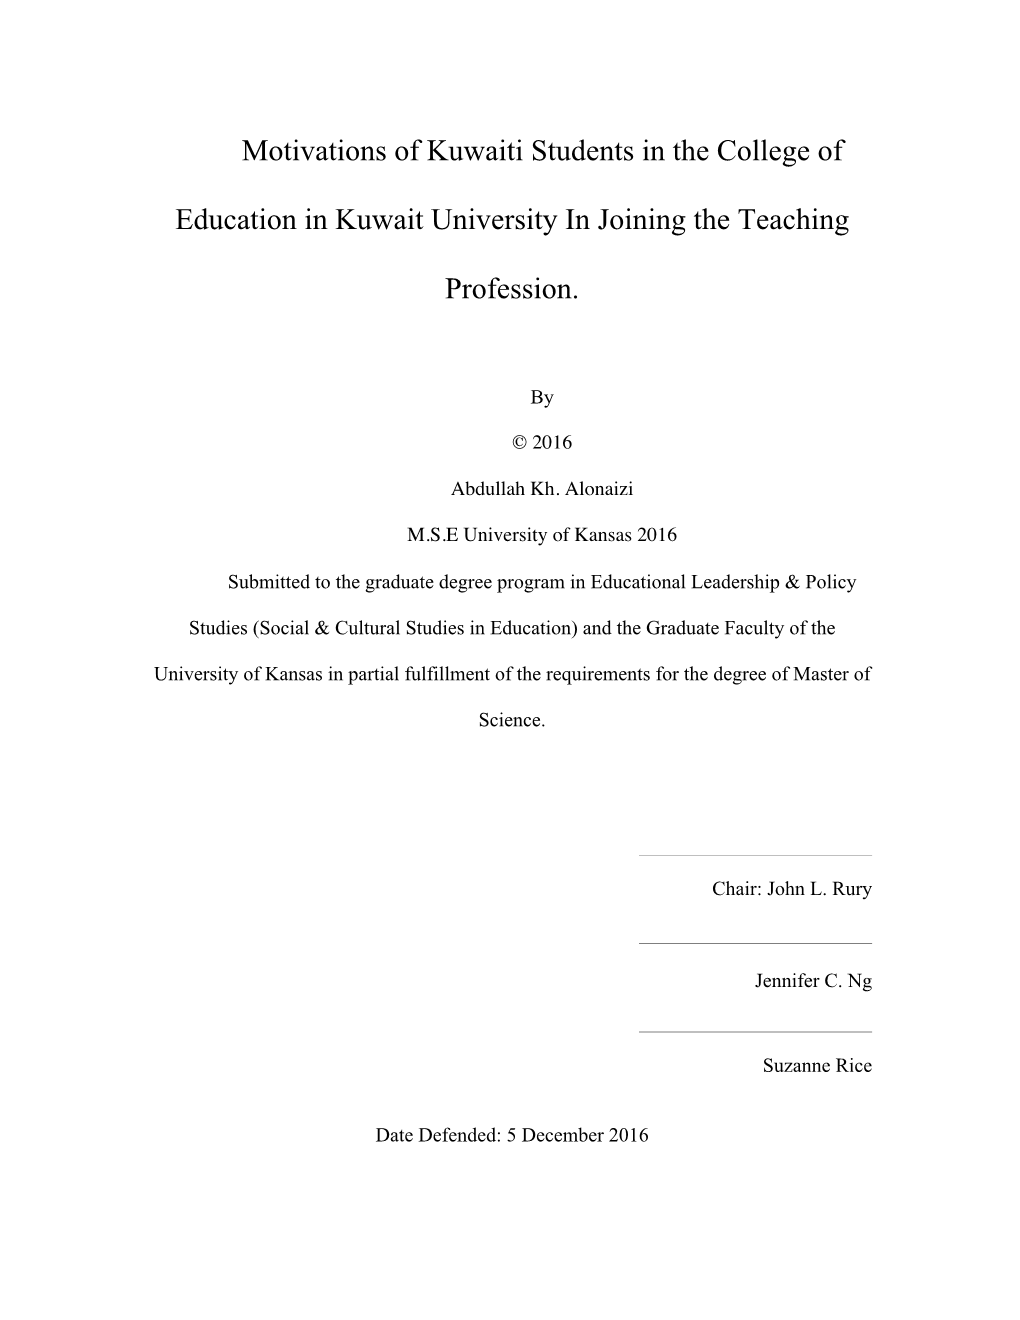 Motivations of Kuwaiti Students in the College of Education in Kuwait